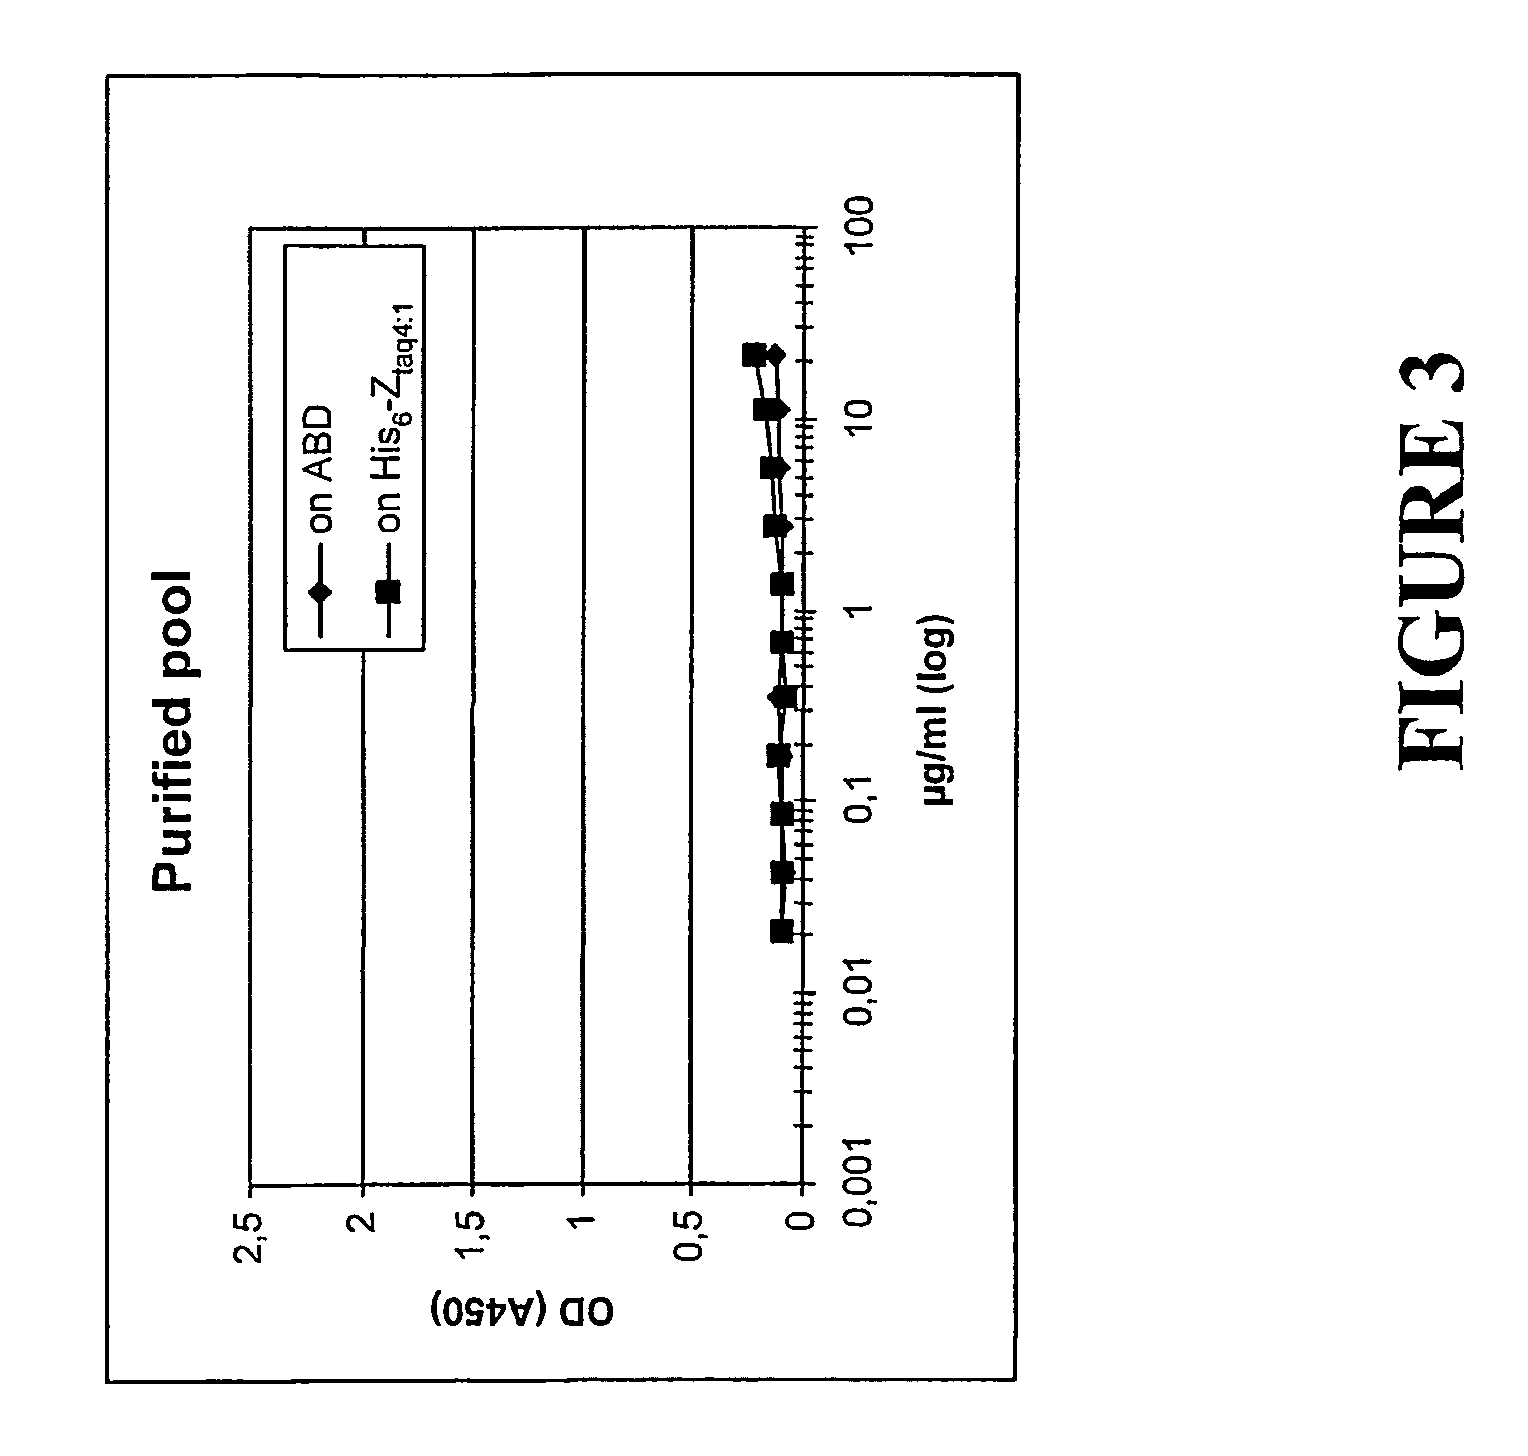 Method for reducing the immune response to a biologically active protein